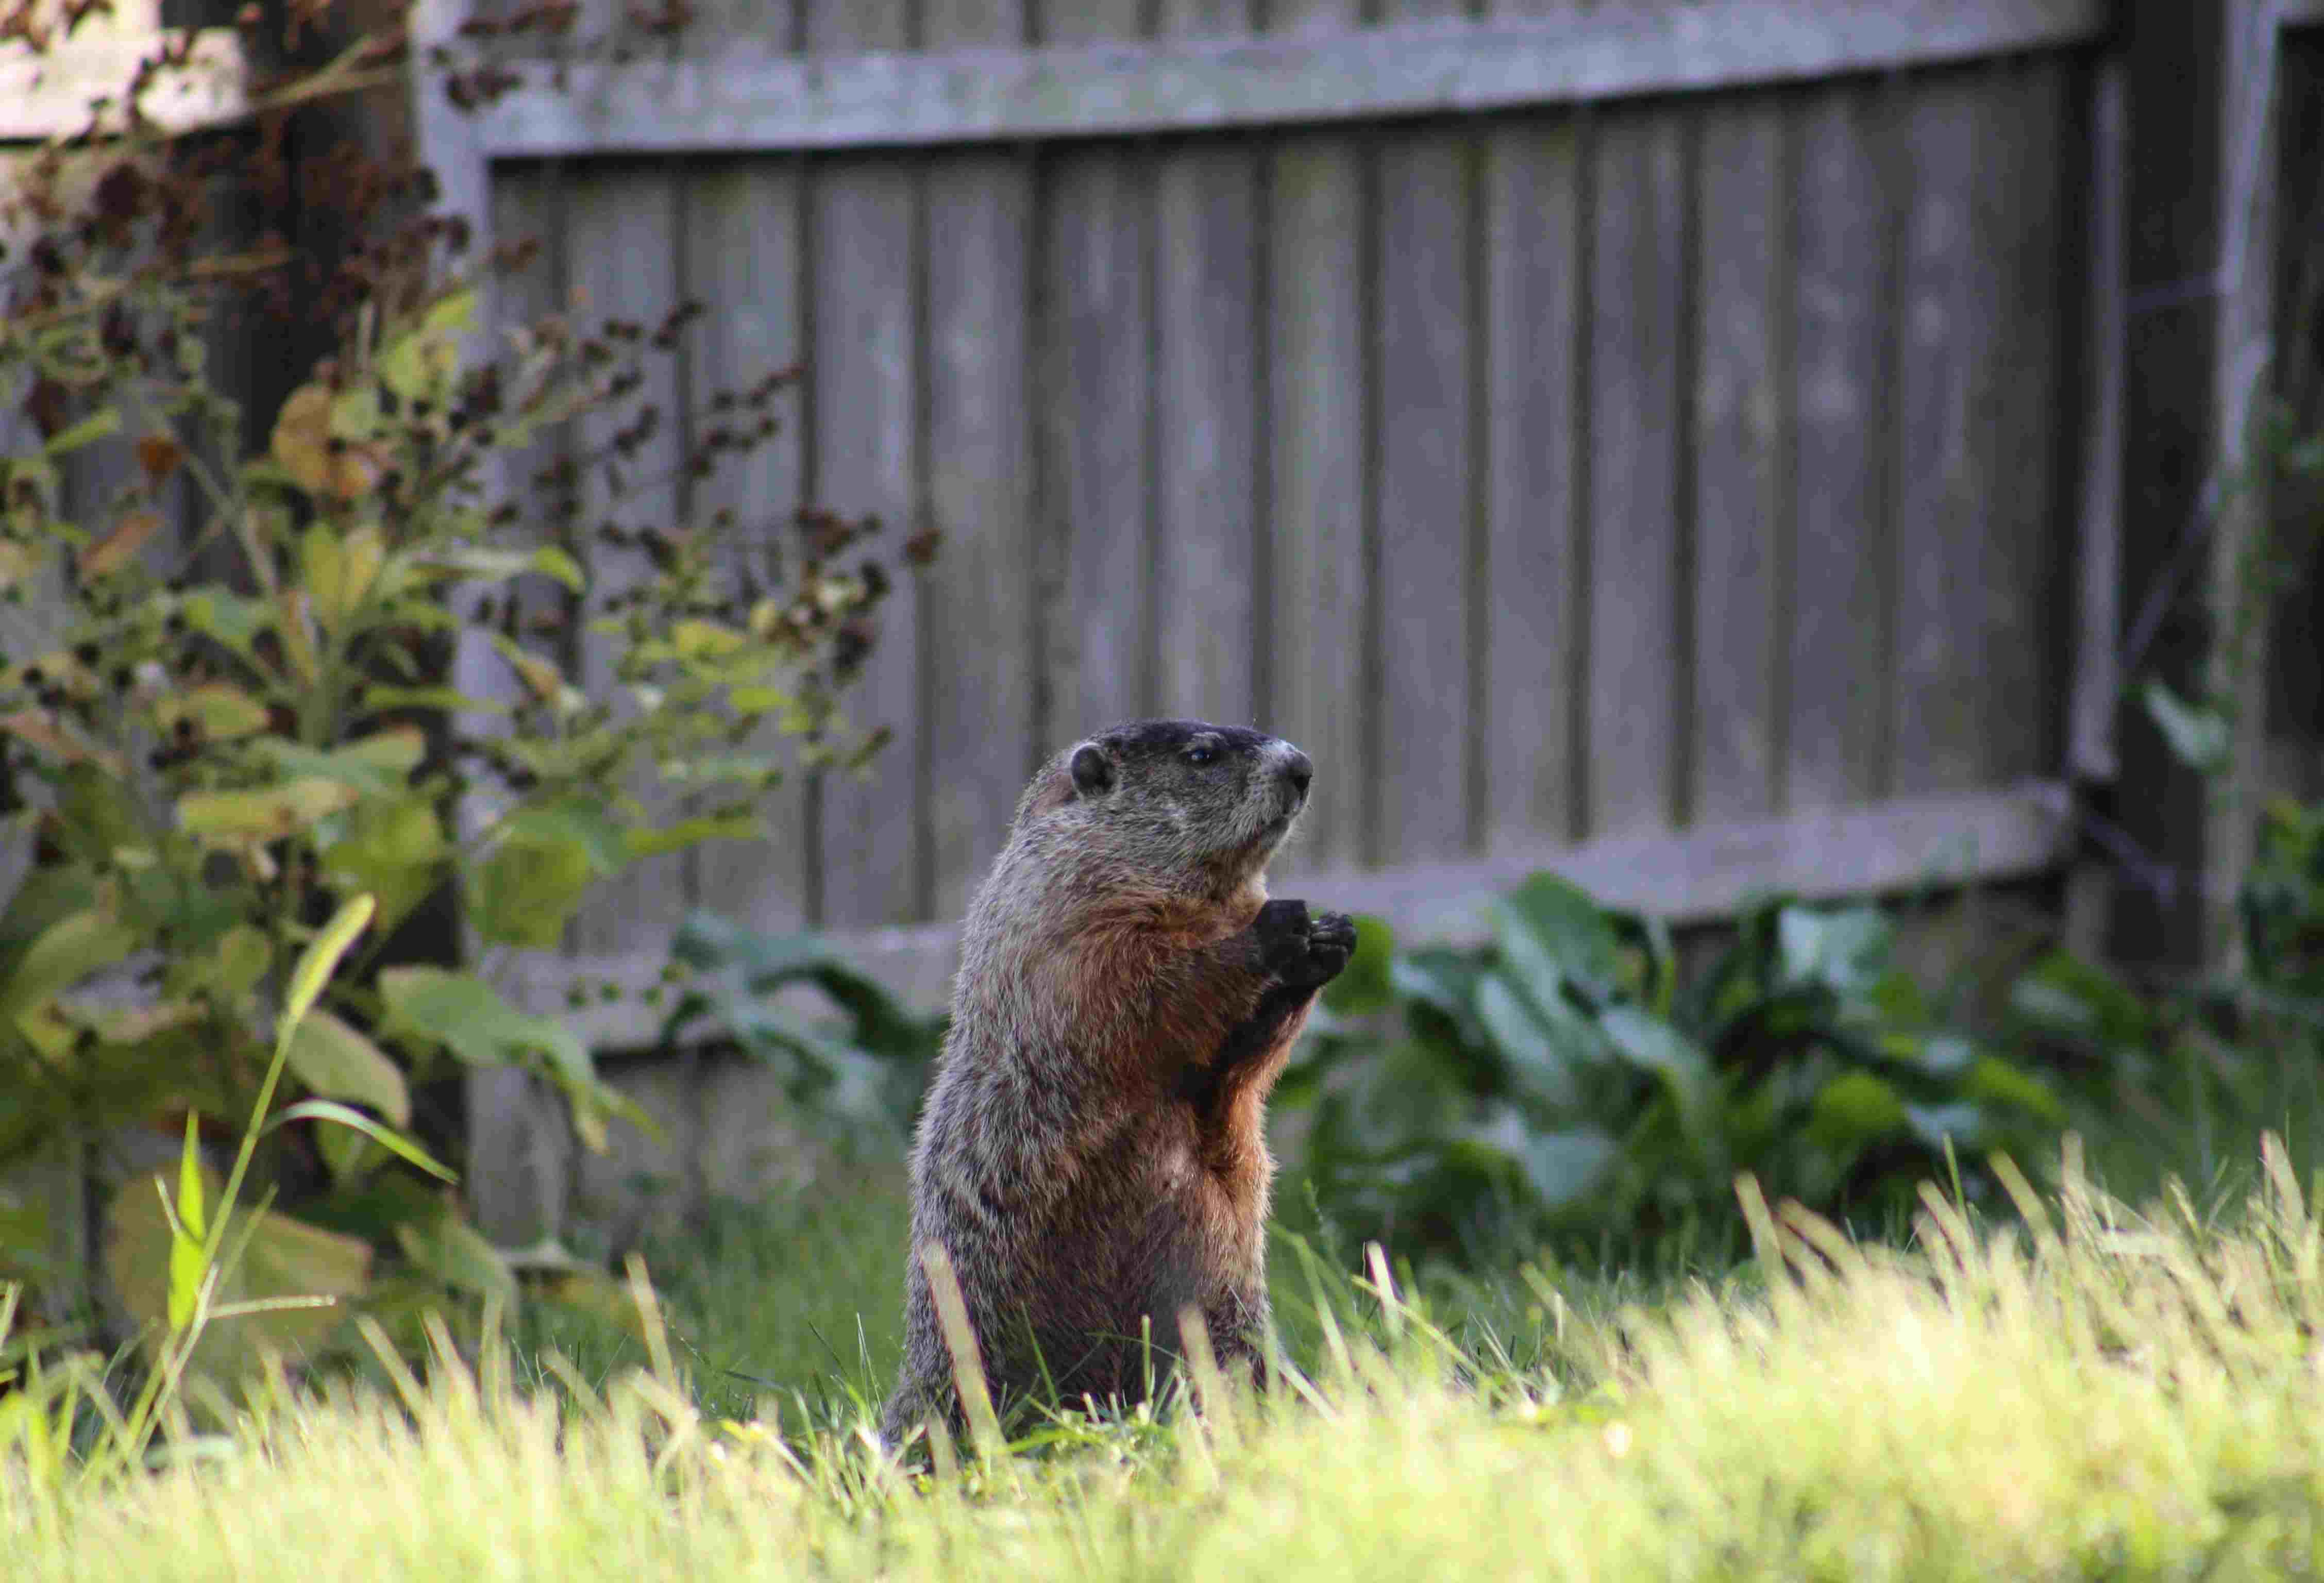 How To Get Rid Of A Groundhog In Your Backyard